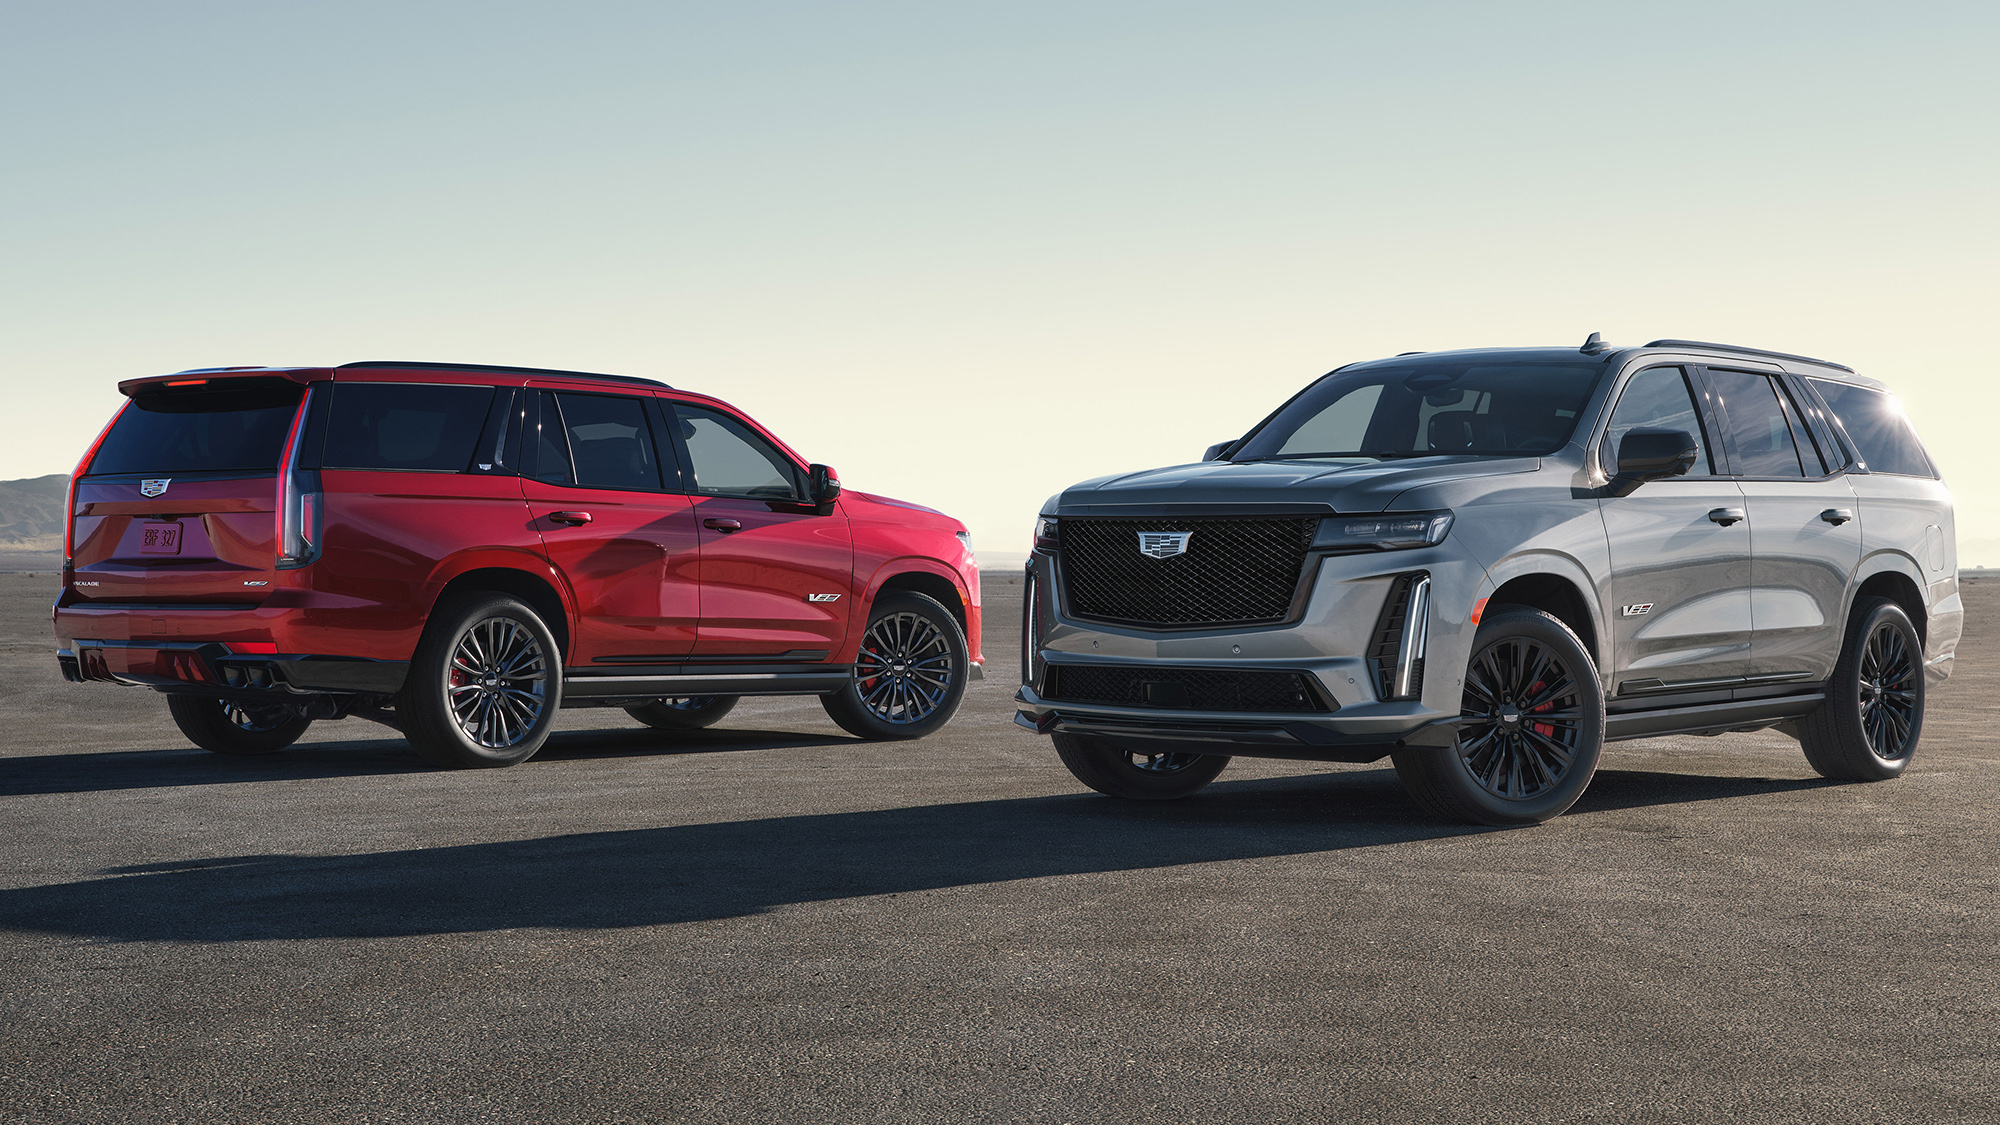 The 2023 Cadillac Escalade will be the first SUV to don the high-performance V-Series badge. Preproduction model shown. Actual production model will vary. Escalade-V availability will be announced spring 2022.